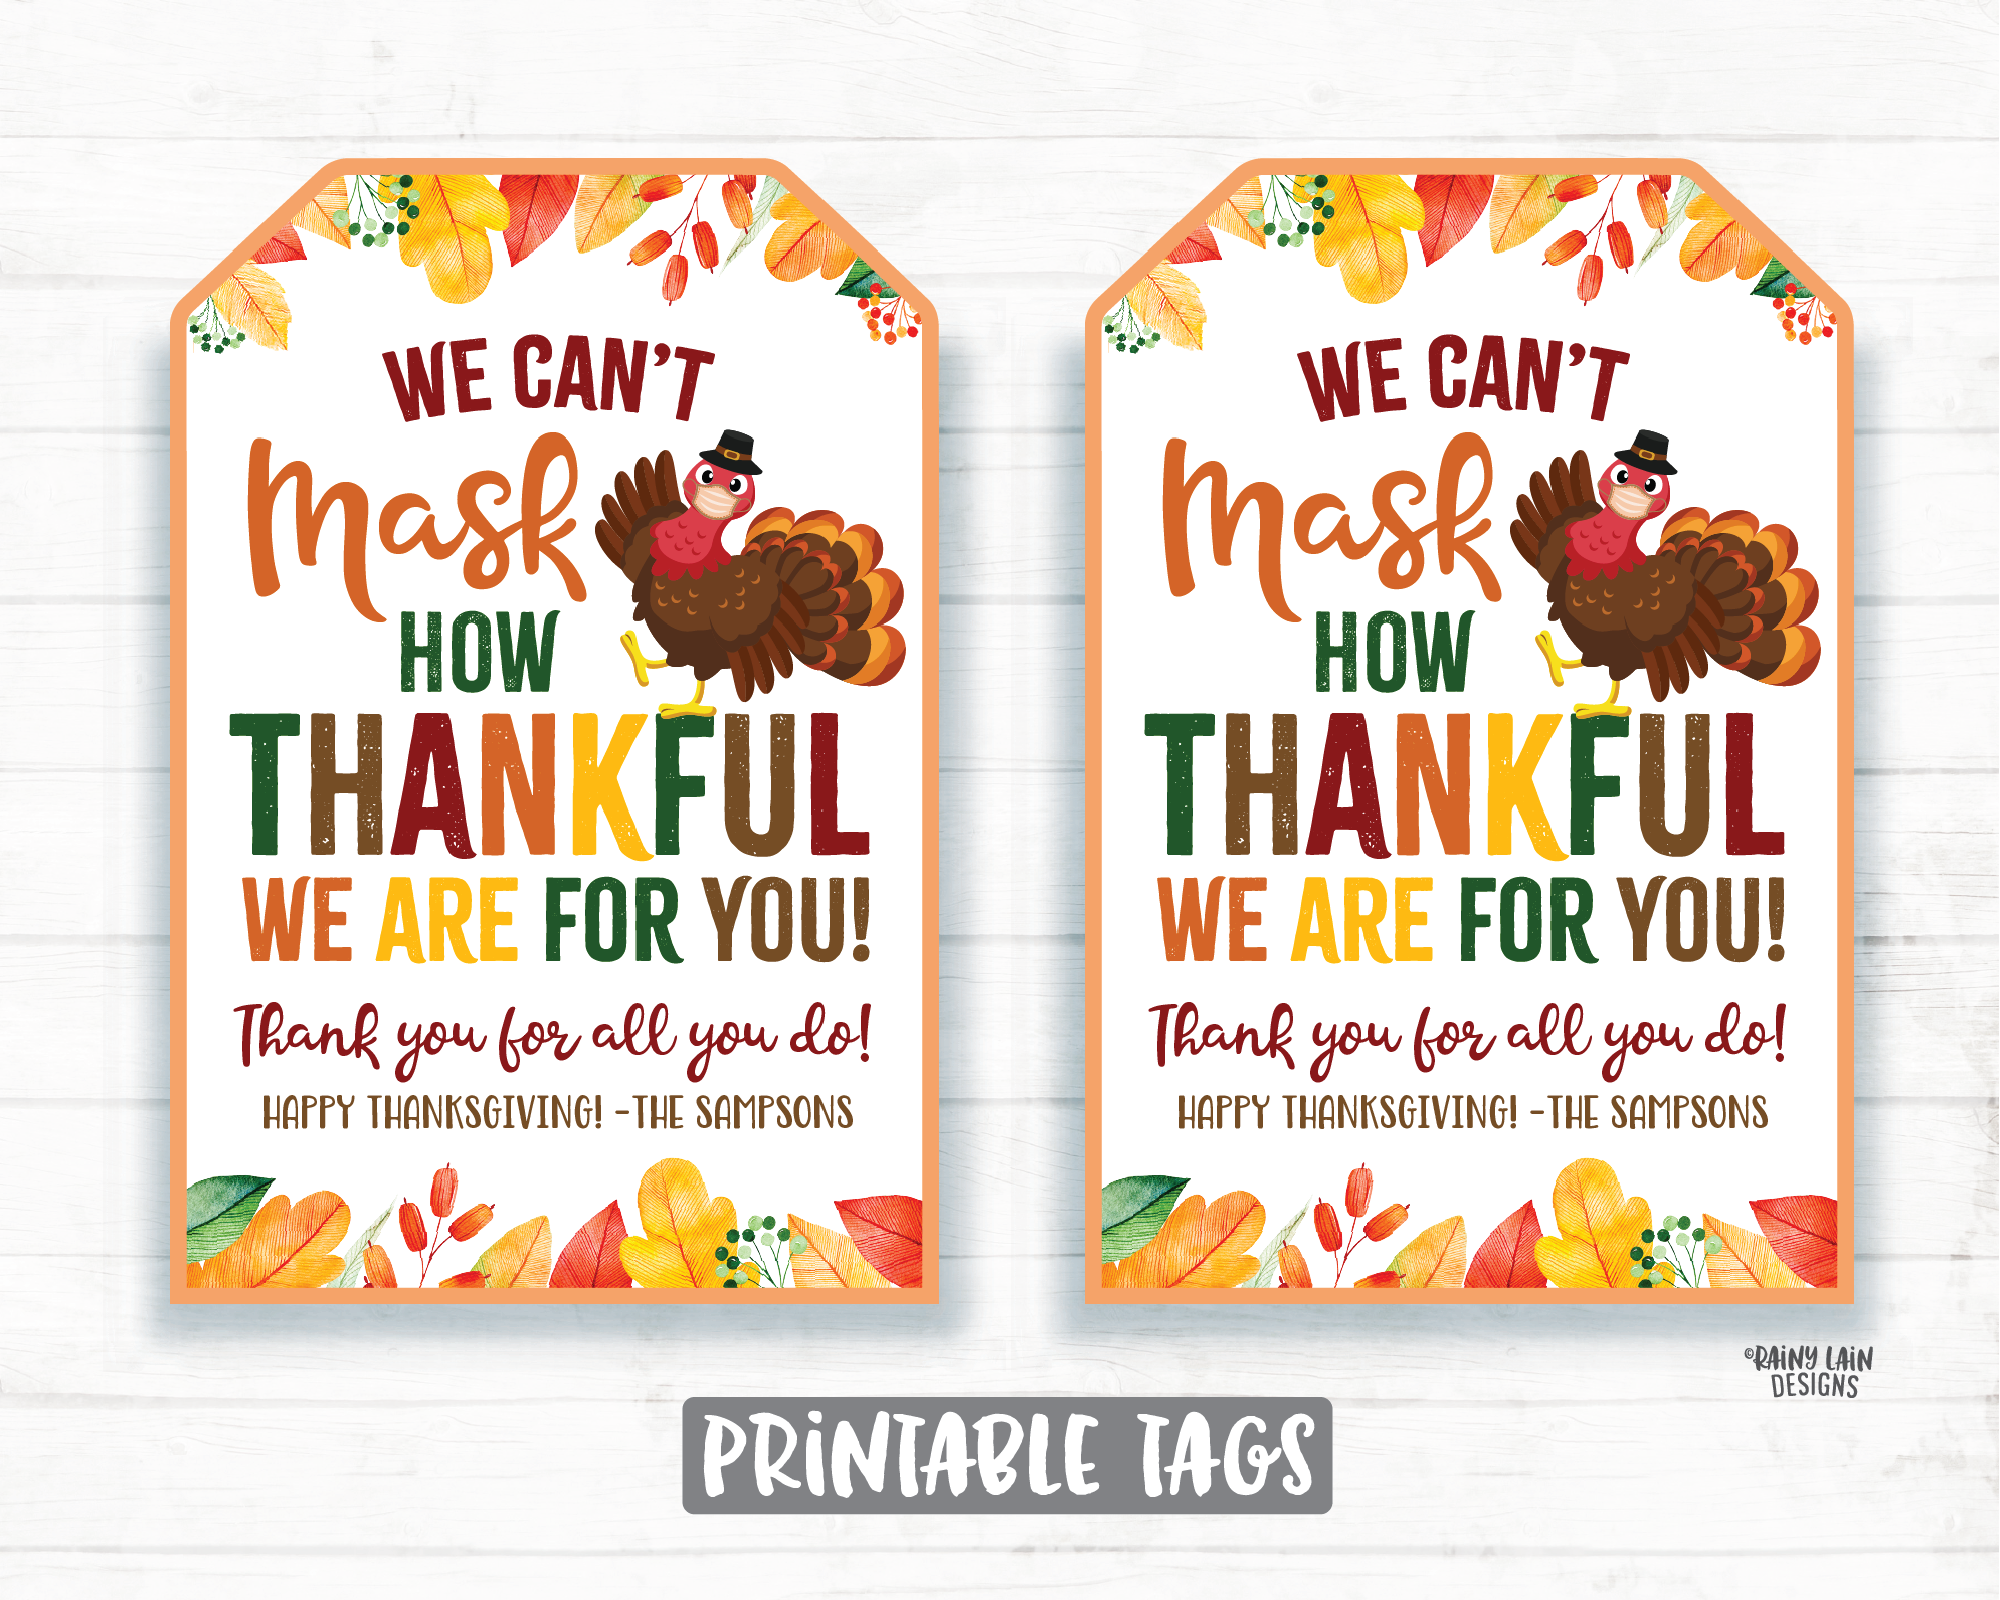 Can't Mask Thankful Face Mask Gift Tag Thanksgiving Tags Employee Appreciation Tag Company Essential Worker Staff Corporate Teacher Mask Tag